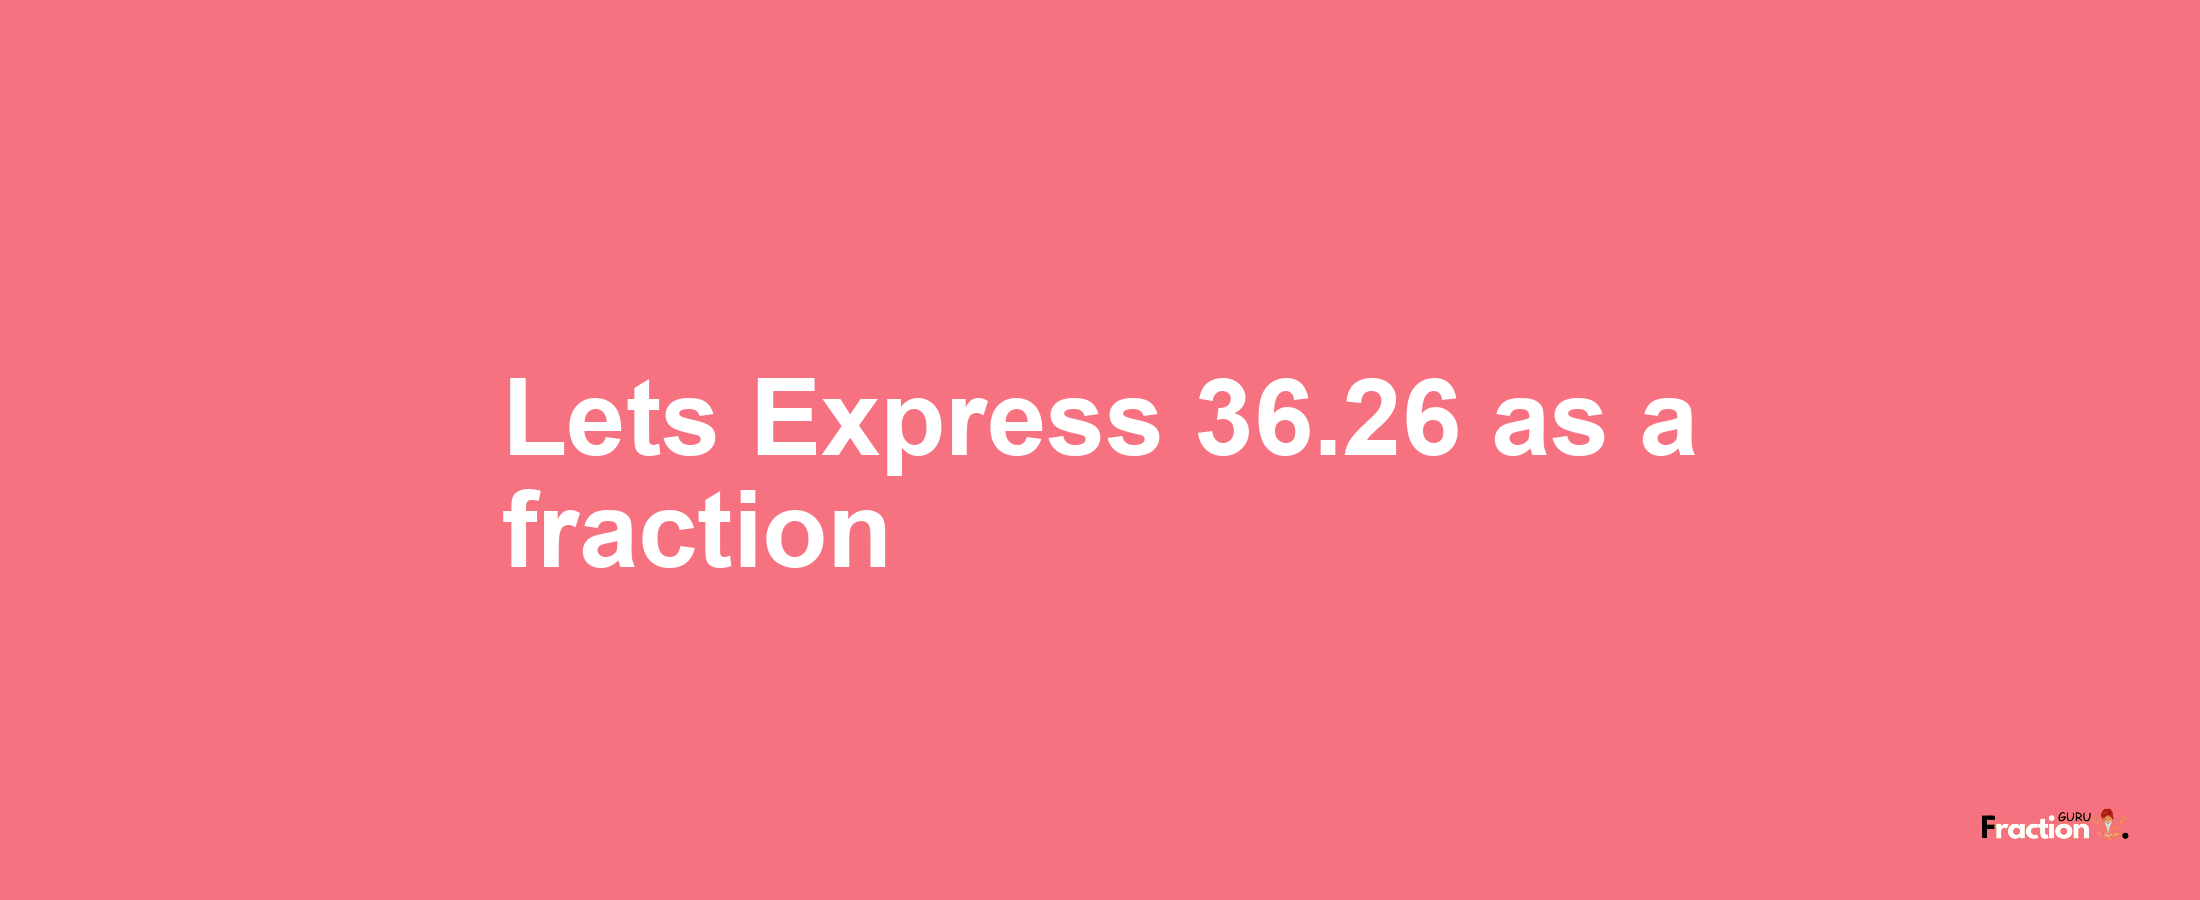 Lets Express 36.26 as afraction